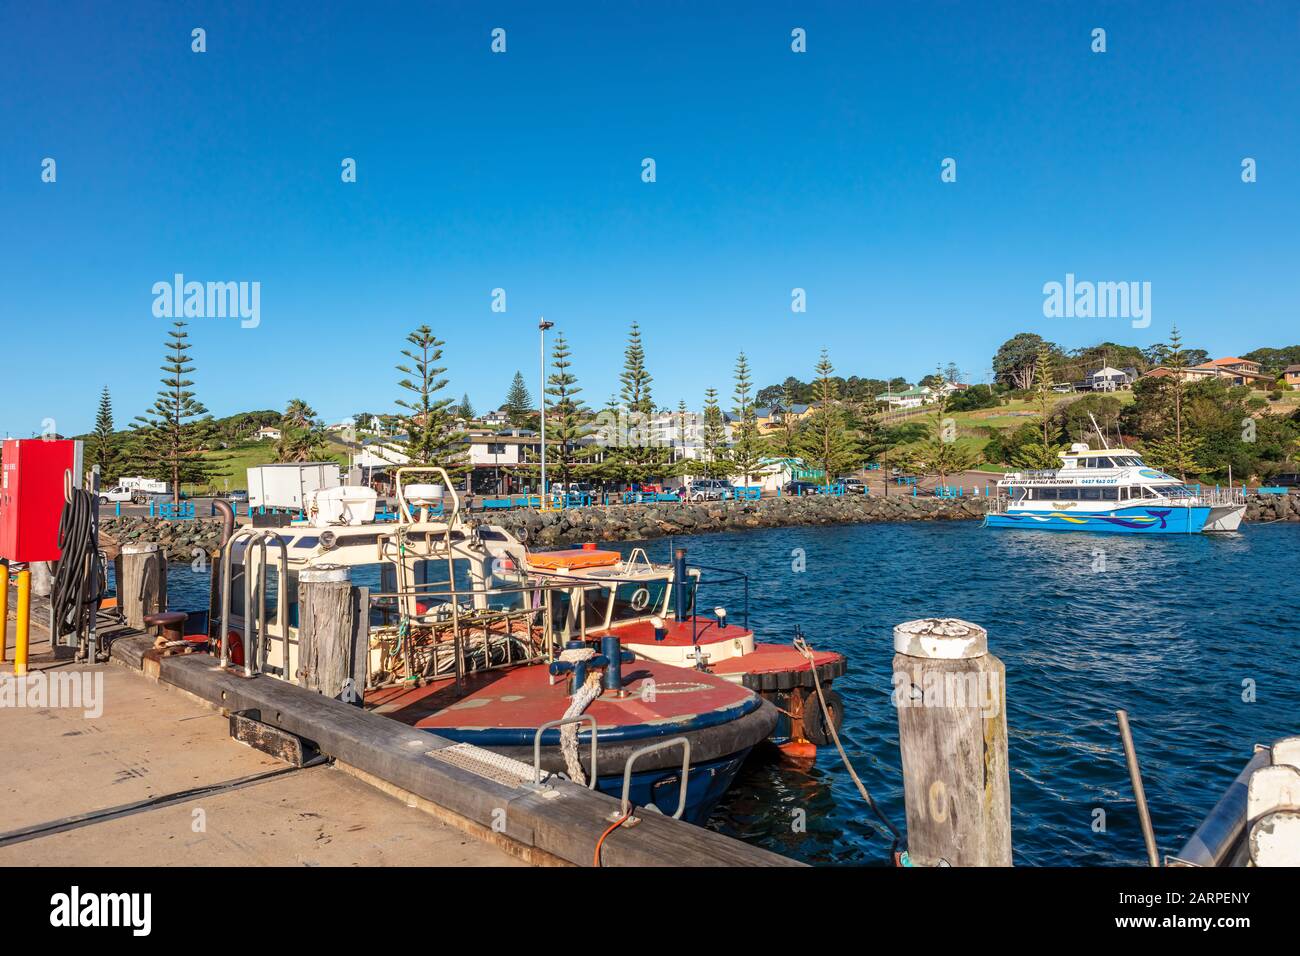 Pier at the Fishing Boat Harbour at Eden, NSW, Australia. Stock Photo